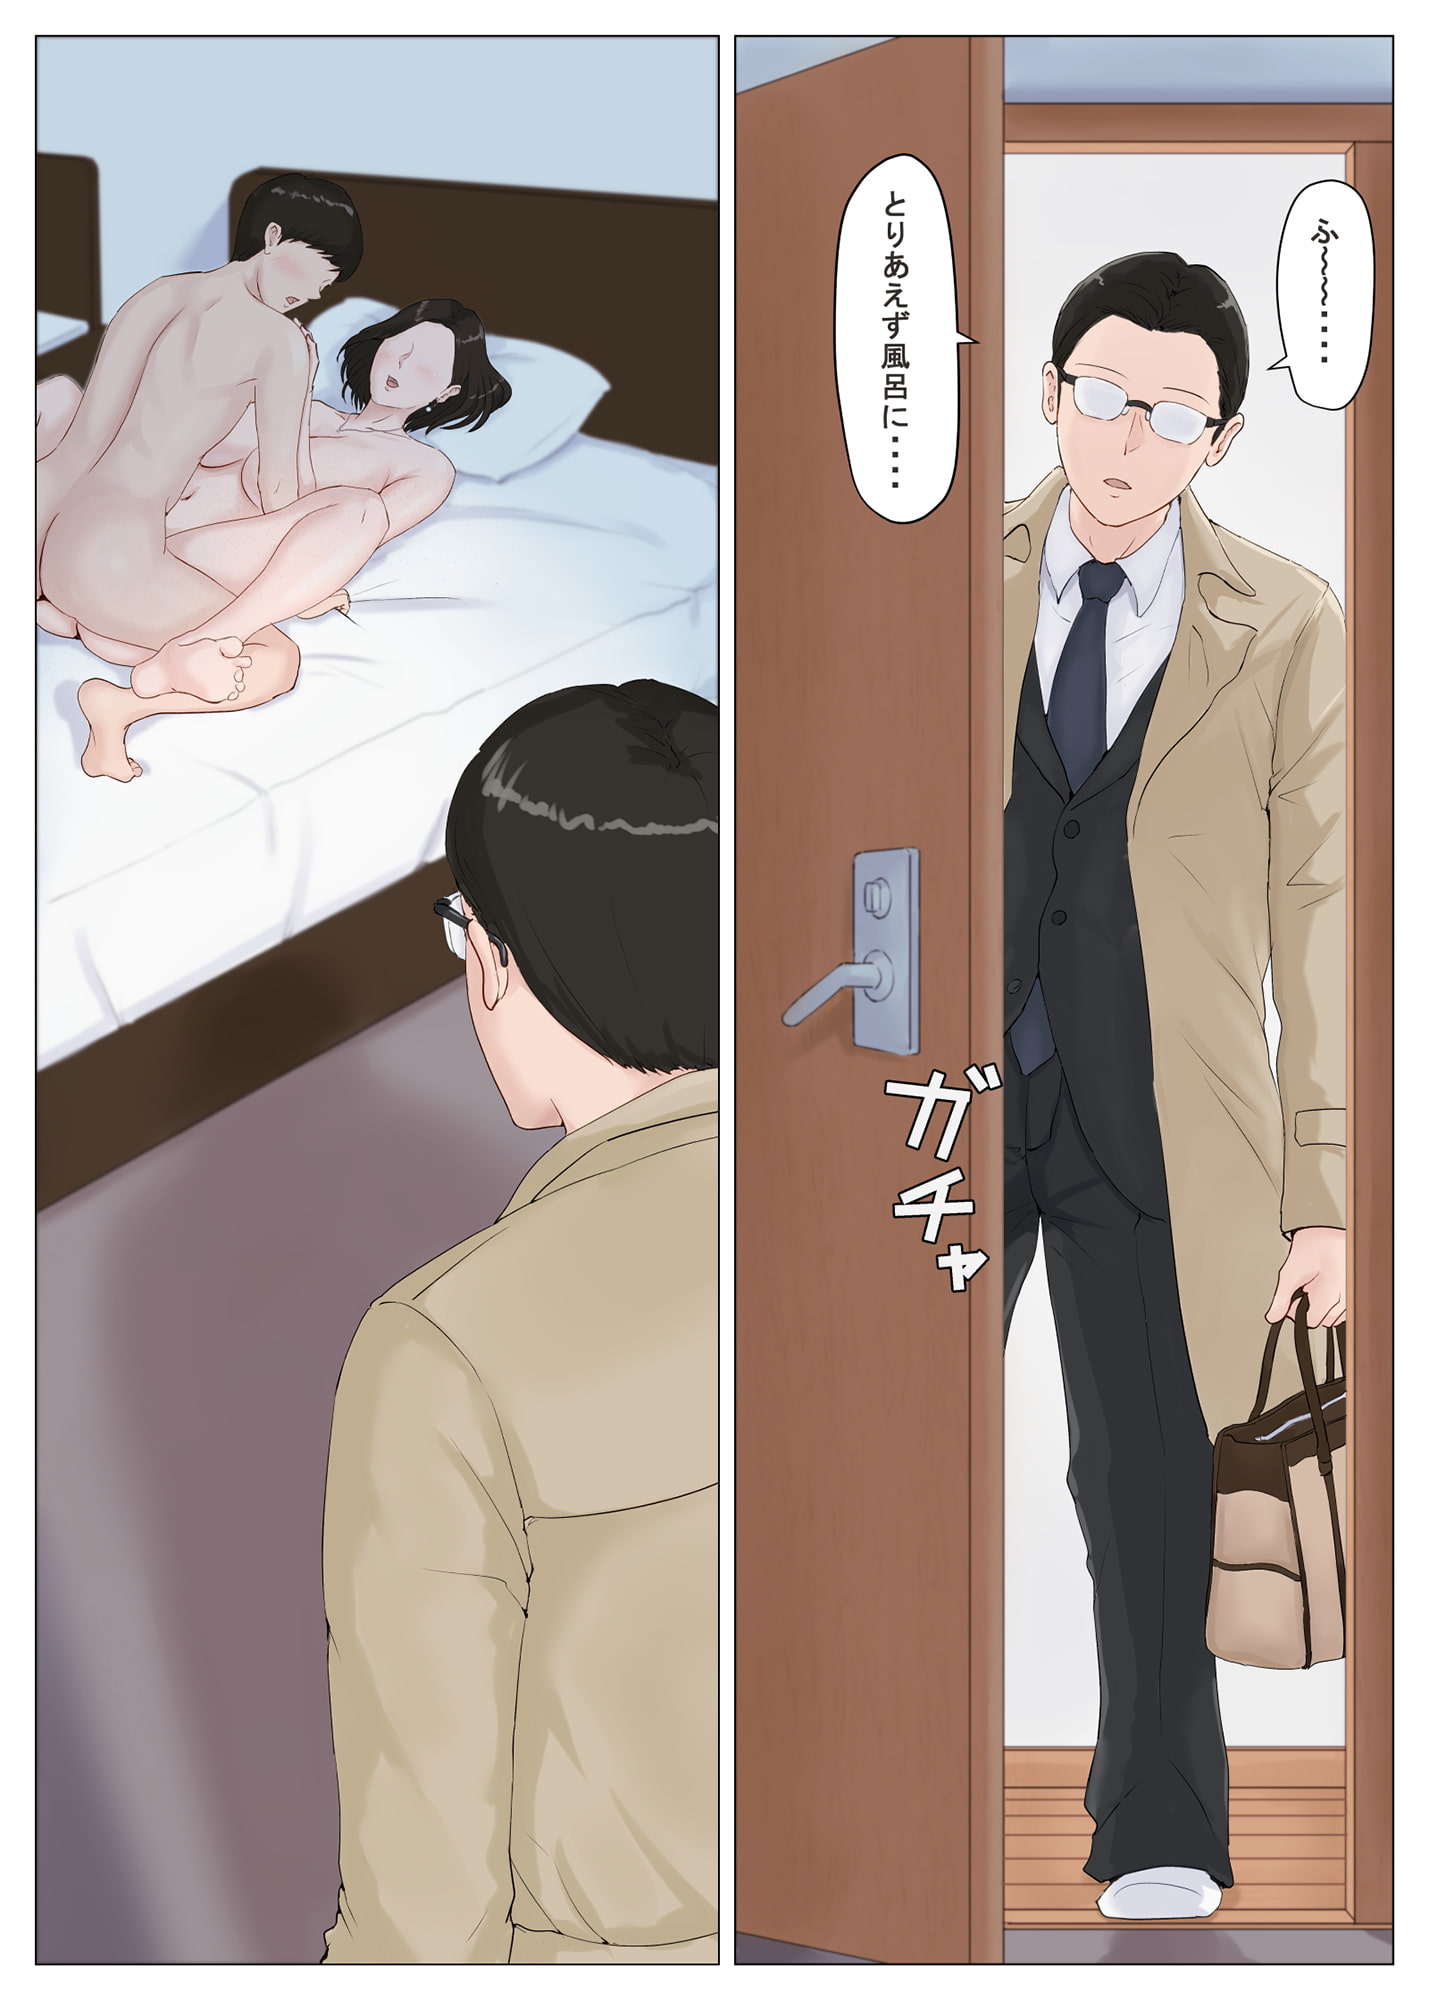 Only Mother Can Satisfy Me!! 5 ~Final Chapter Part 1~